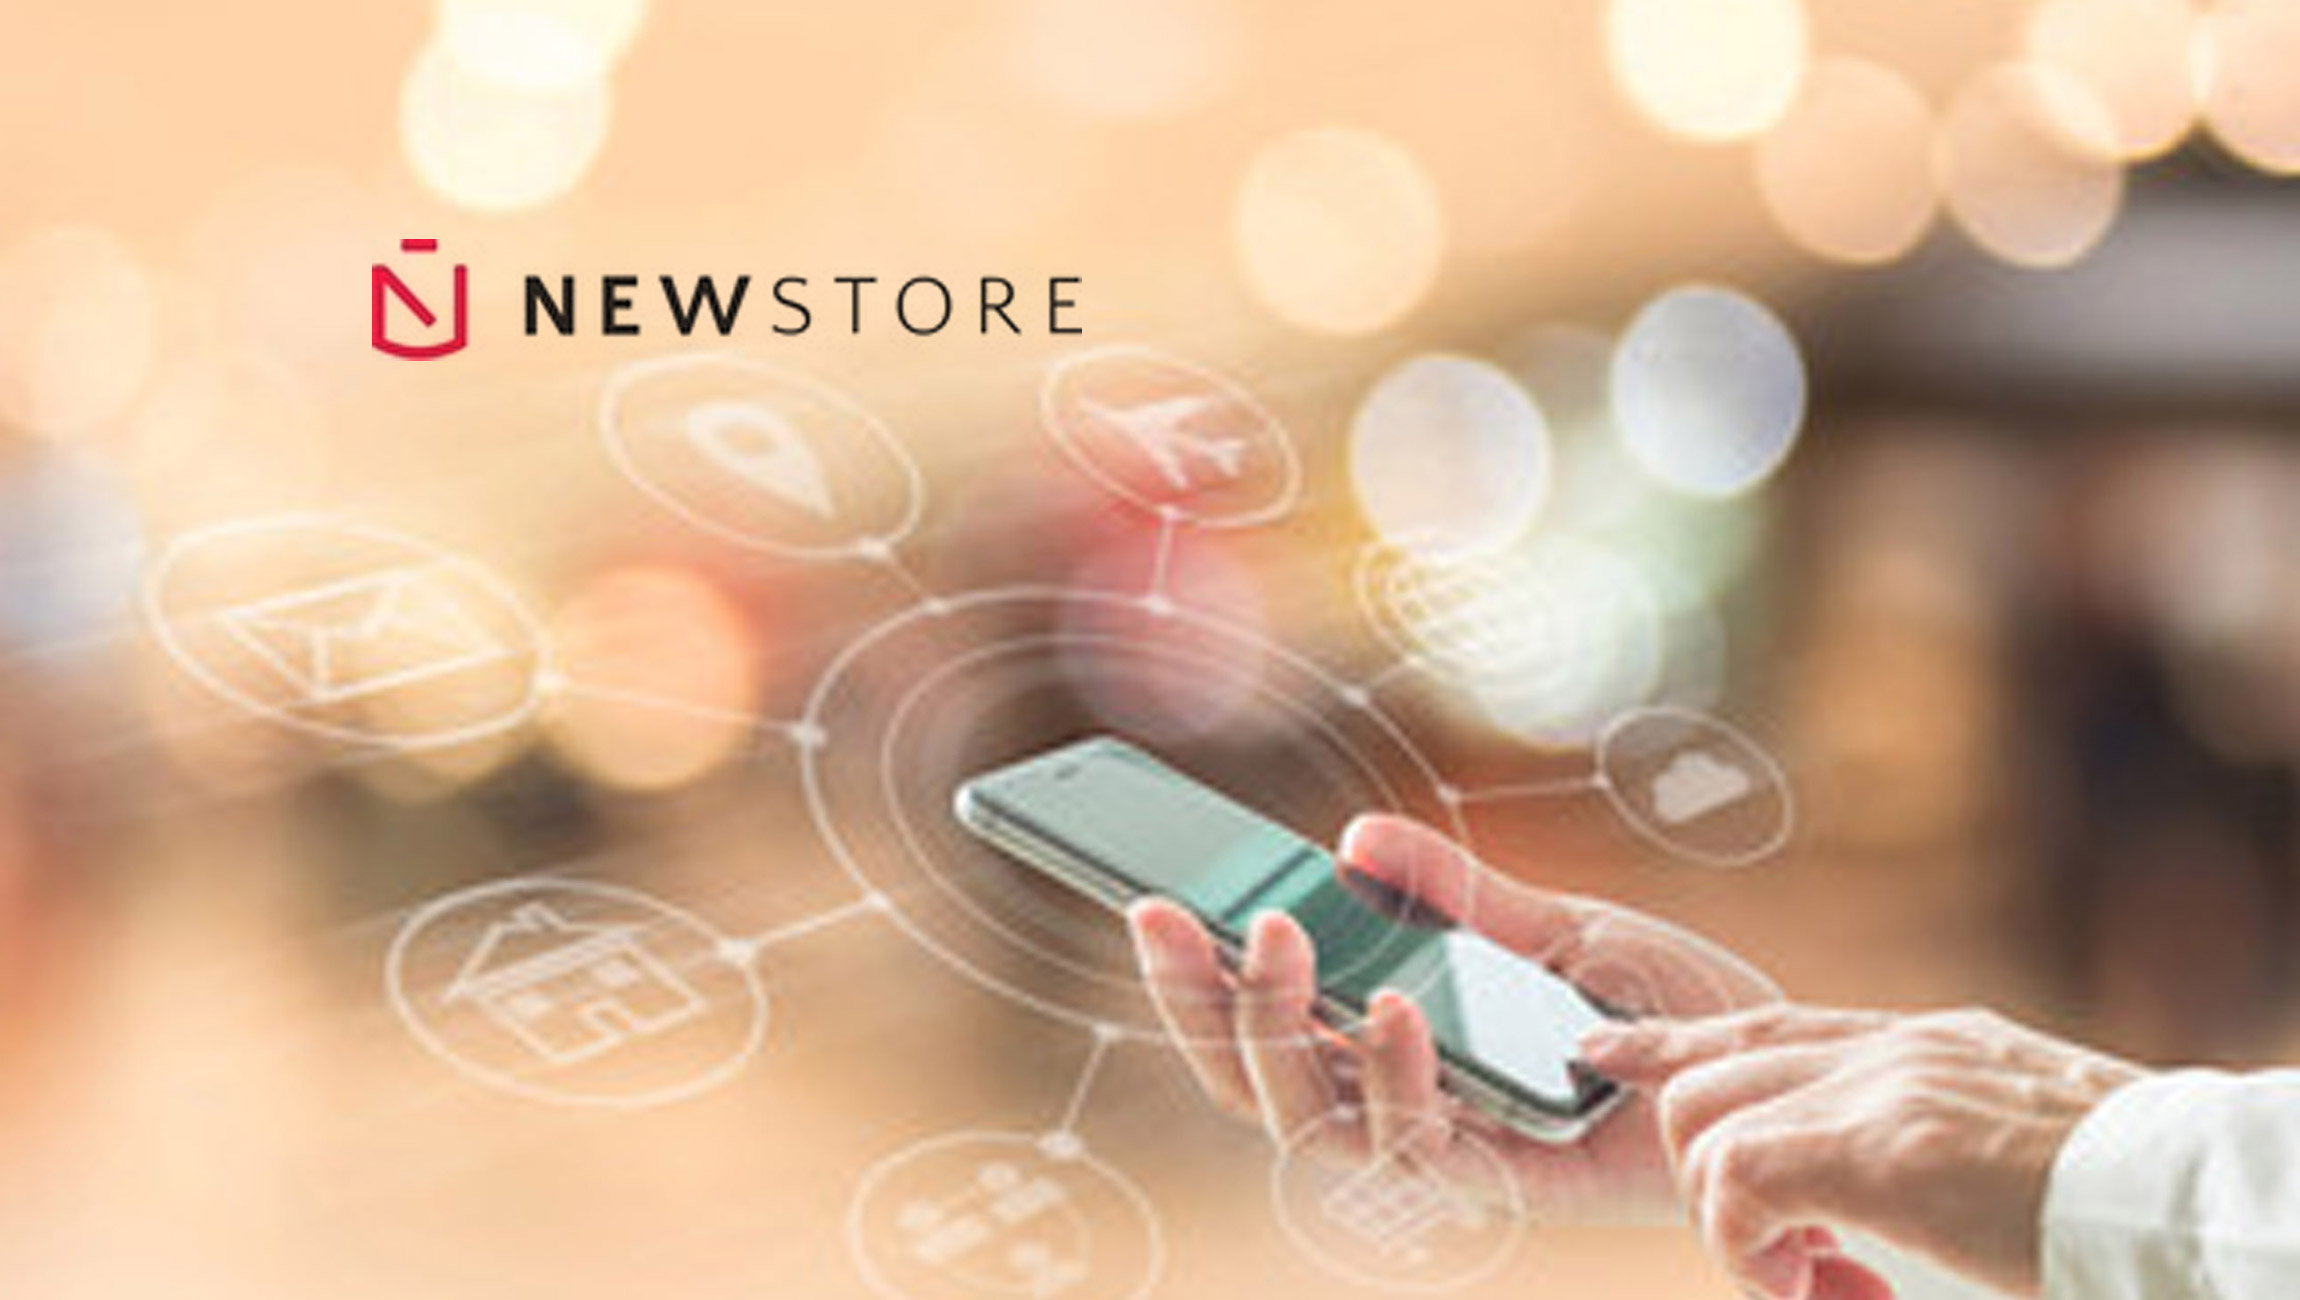 Tom Tailor Launches NewStore Consumer App to Drive Digital Growth